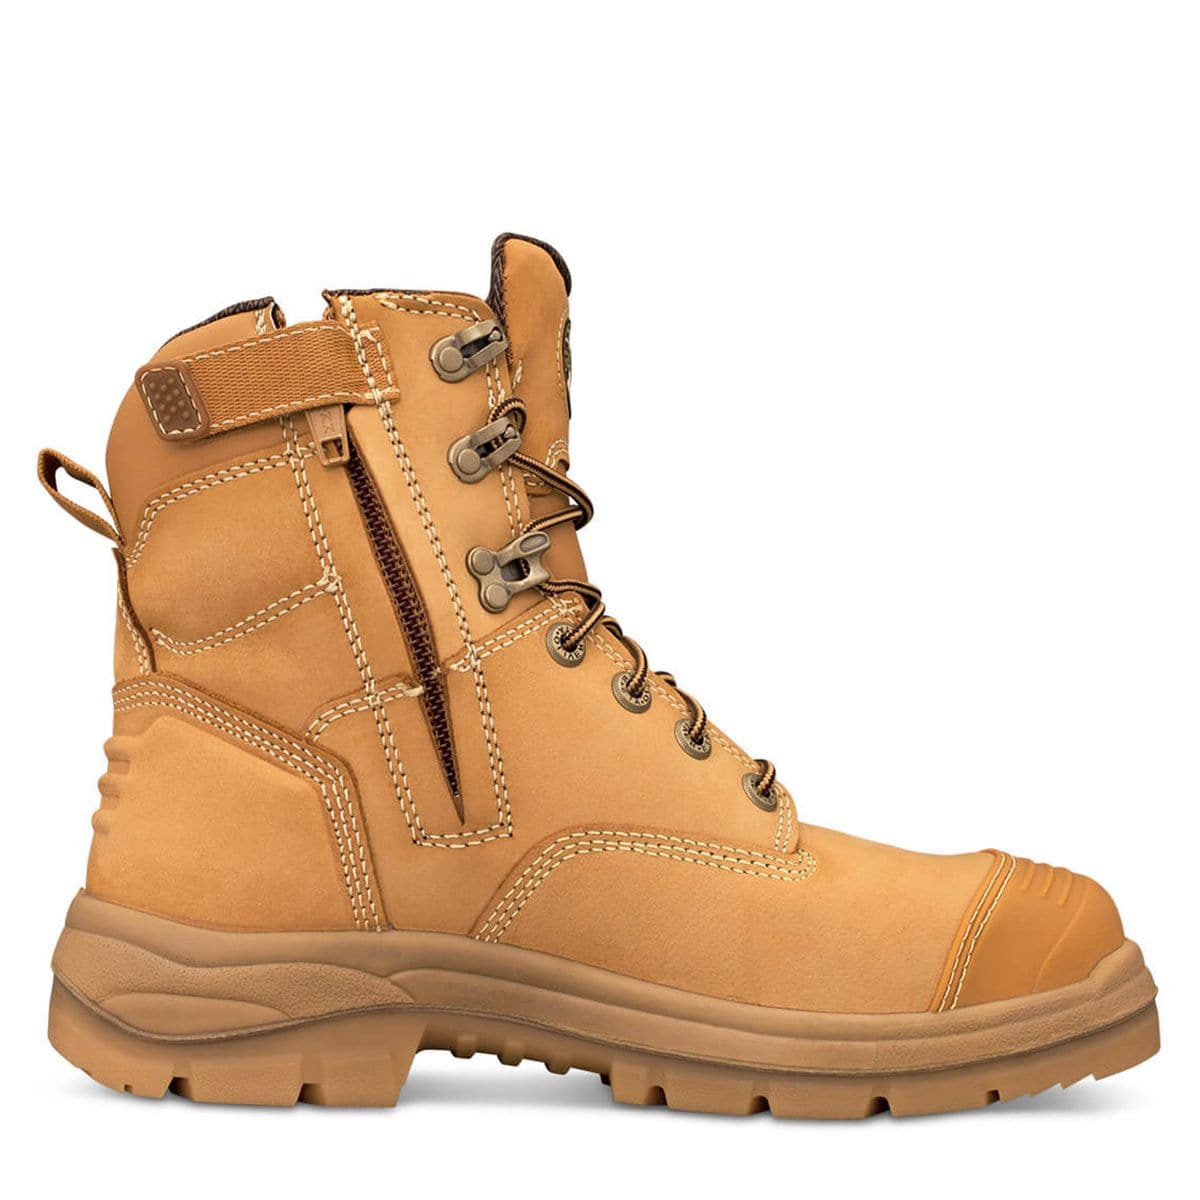 Oliver Mens 55-332Z 150mm Zip at Boots Steel Bump Nitrile Wheat 6